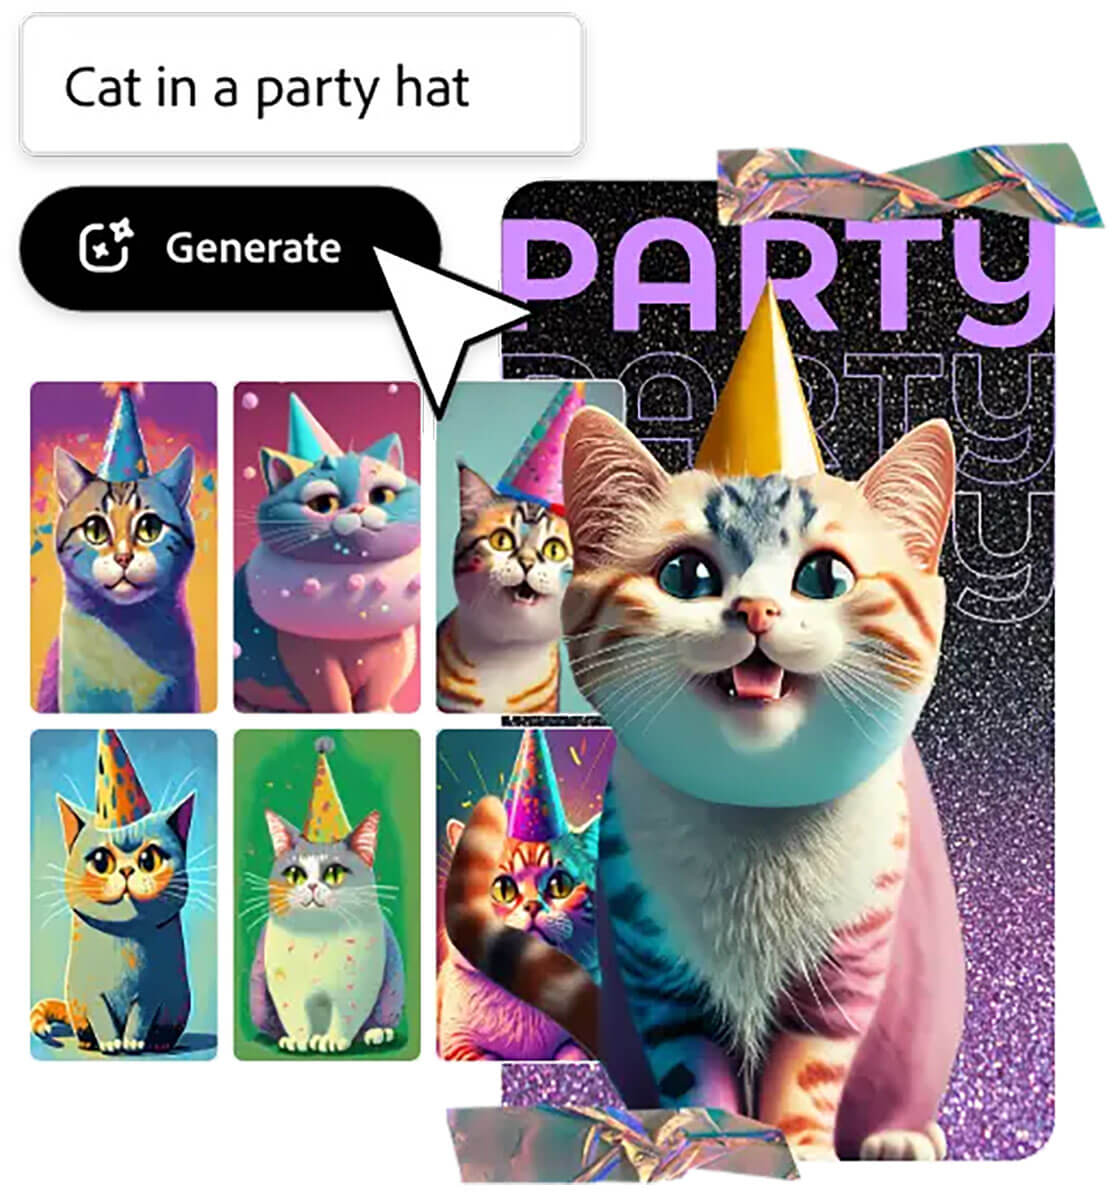 Adobe Express - Generate cat in party hat